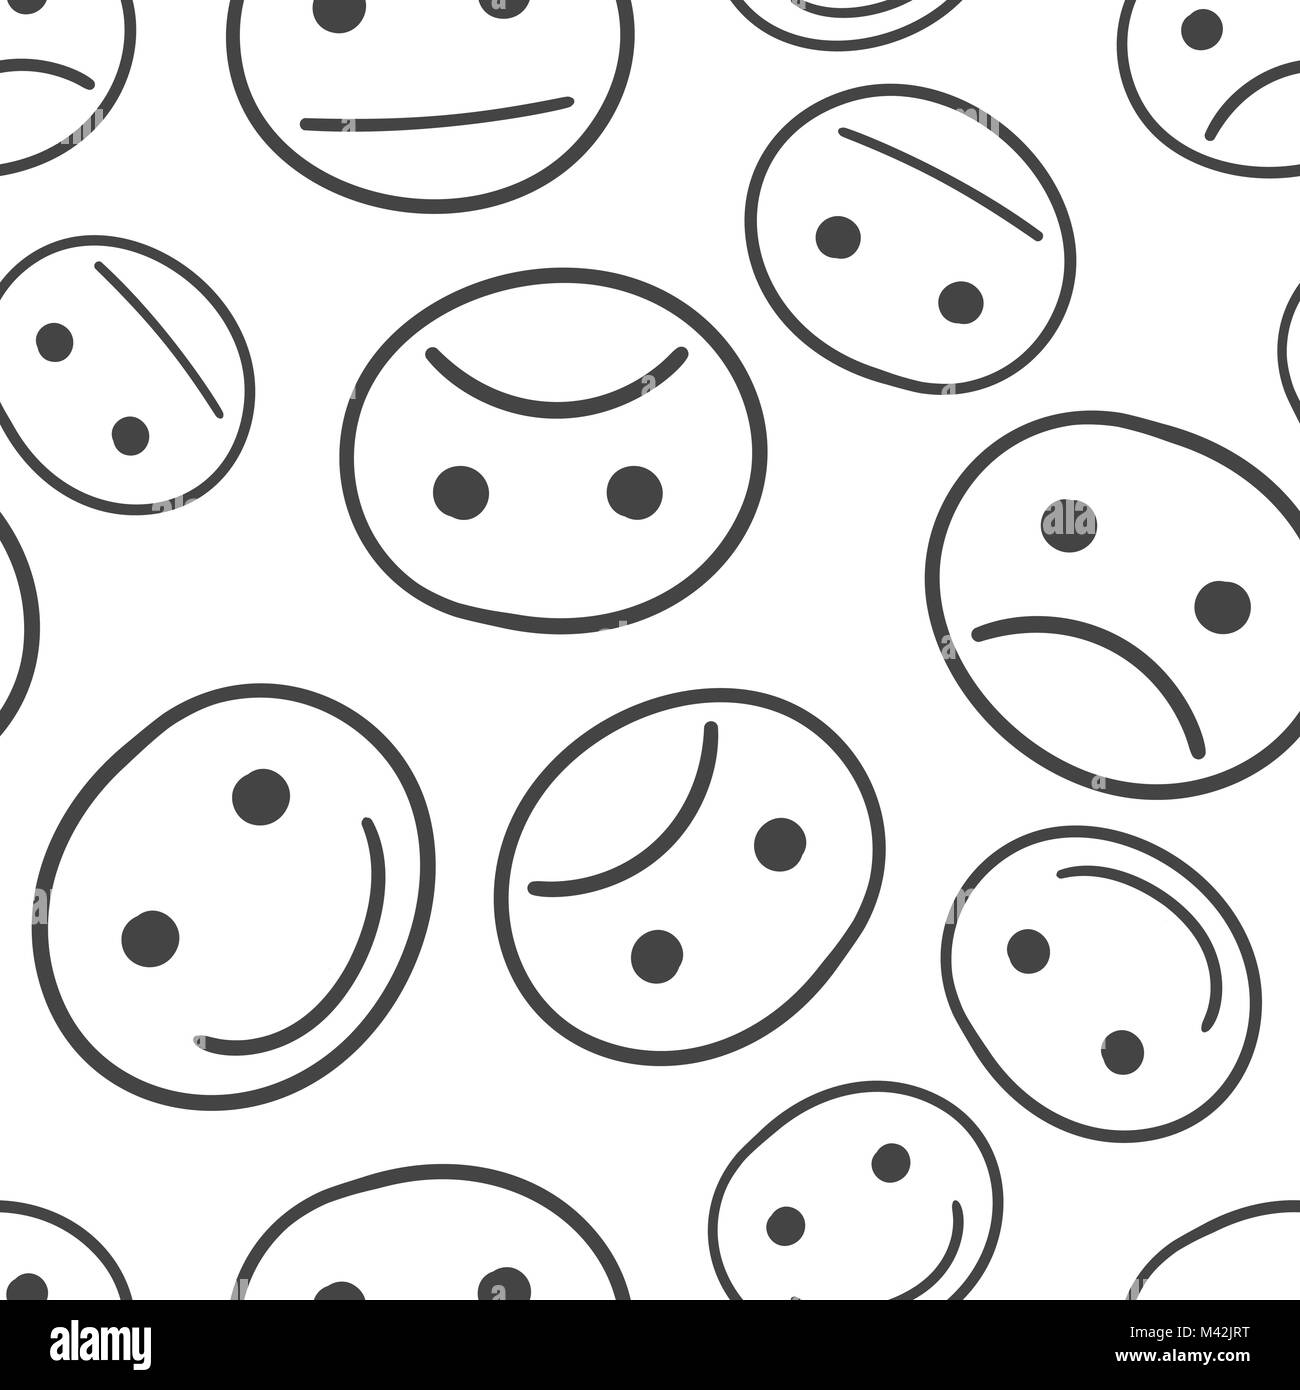 Hand drawn smiley face seamless pattern background. Business flat vector illustration. Emotion face sign symbol pattern. Stock Vector